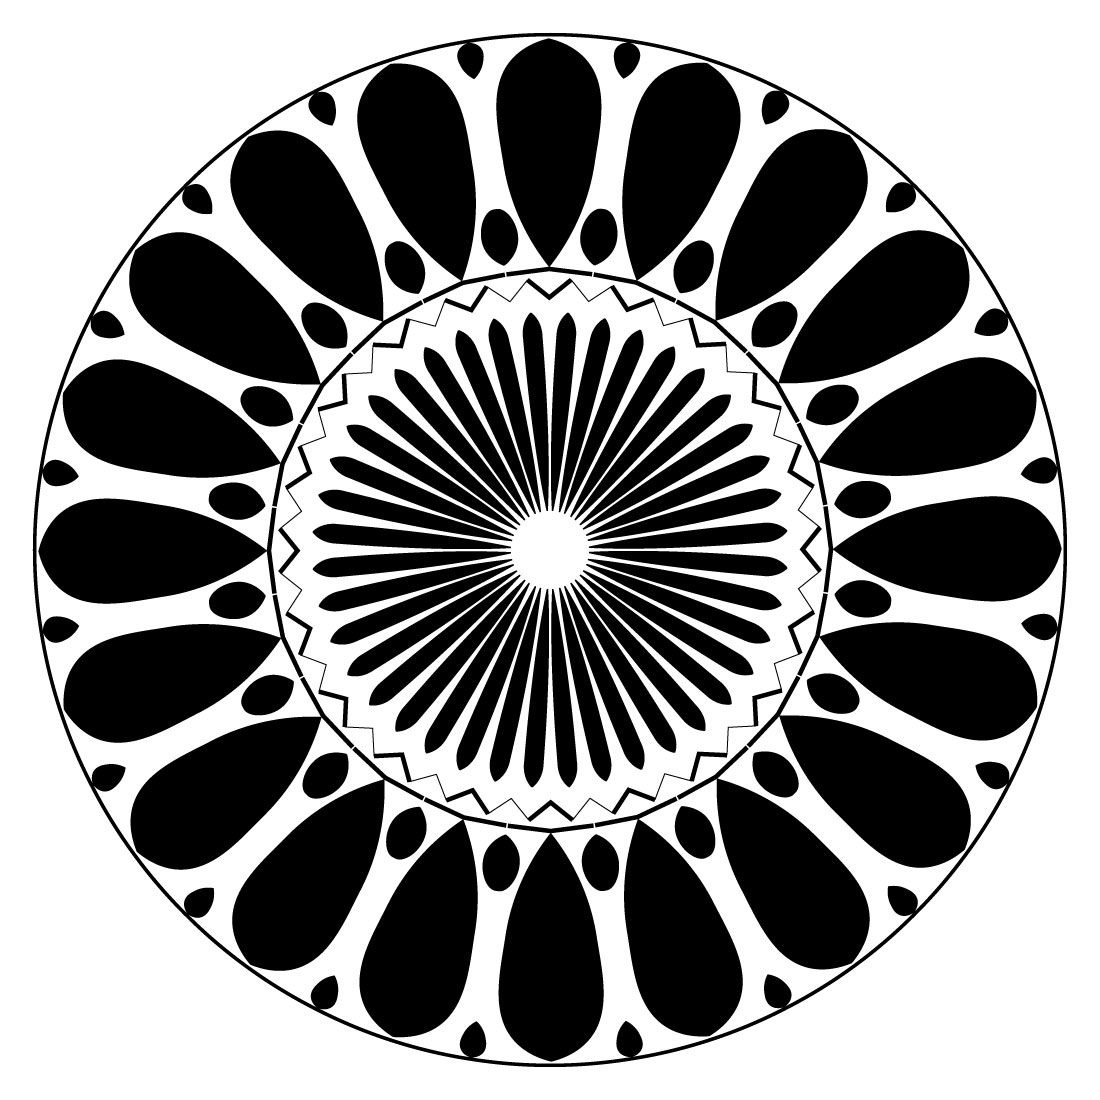 Mandala Art with black and white with middle light preview image.